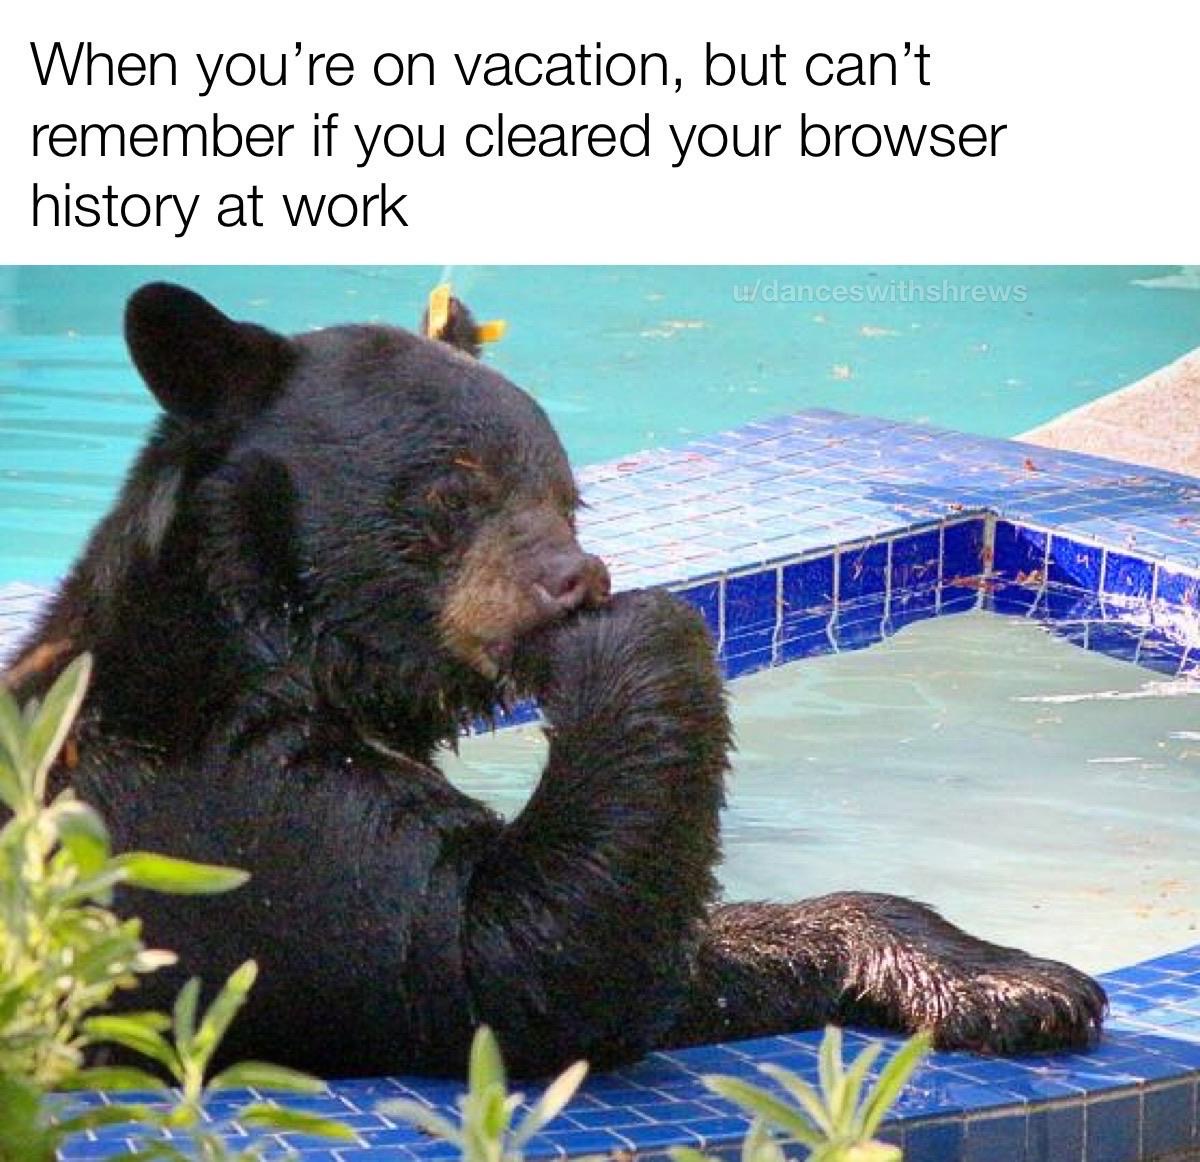 bear in jacuzzi - When you're on vacation, but can't remember if you cleared your browser history at work udanceswithshrews